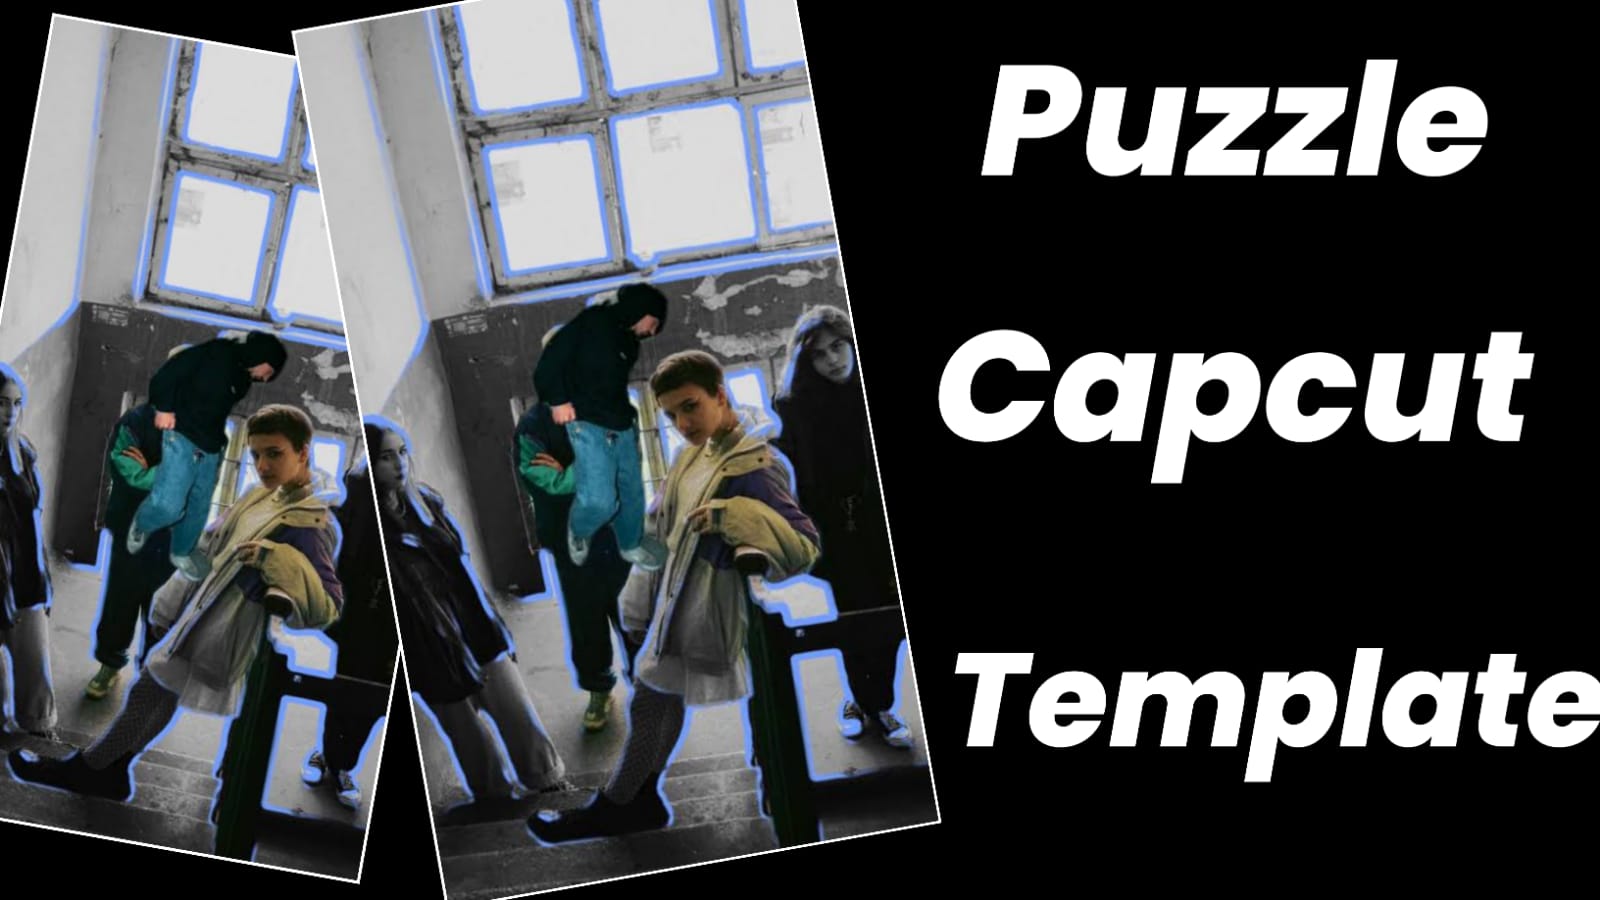 puzzle-capcut-template-link-2023-nick-technical